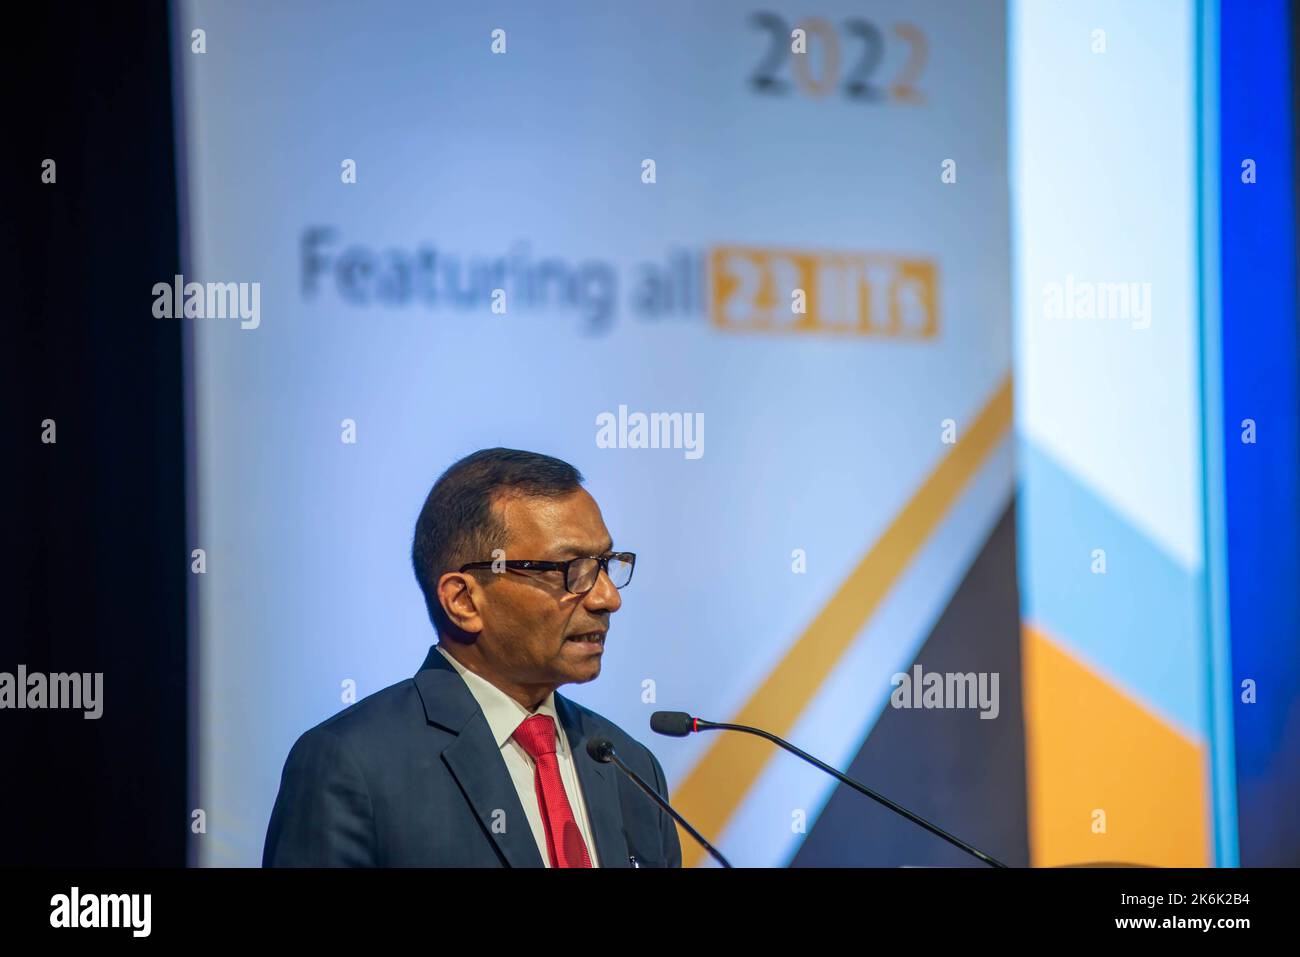 Dr. Pawan Goenka, Chairman, BoG IIT Madras & Chairman, Steering Committee IInvenTiv during inaugural day of IInvenTiv 2022, the first ever all IITs (indian institute of technology) research and development Showcase at the Indian Institute of Technology. IInvenTiv 2022 is an R&D (research and development) Fair organised under the supervision of a Steering Committee headed by Dr. Pawan Goenka, Chairman, BoG (Board of Governors) IIT and the event marks the coming together of all the 23 IITs under one umbrella to showcase their respective research and innovation expertise. (Photo by Pradeep Gaur / Stock Photo